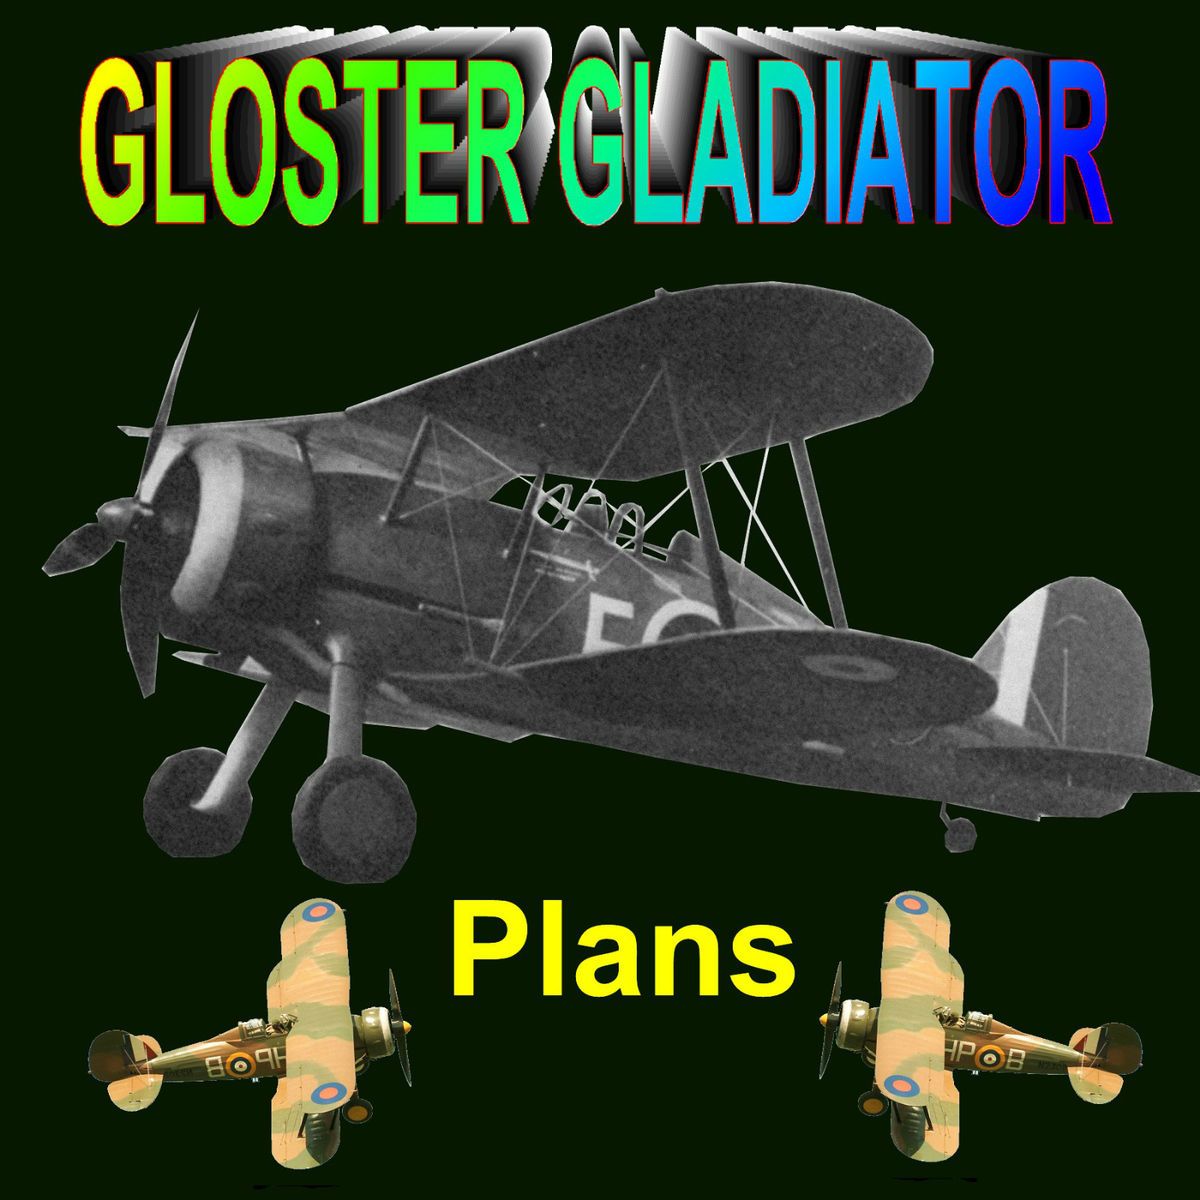   FLIGHT SCALE MODEL AIRPLANE PLANS GLOSTER GLADIATOR RUBBER POWERED